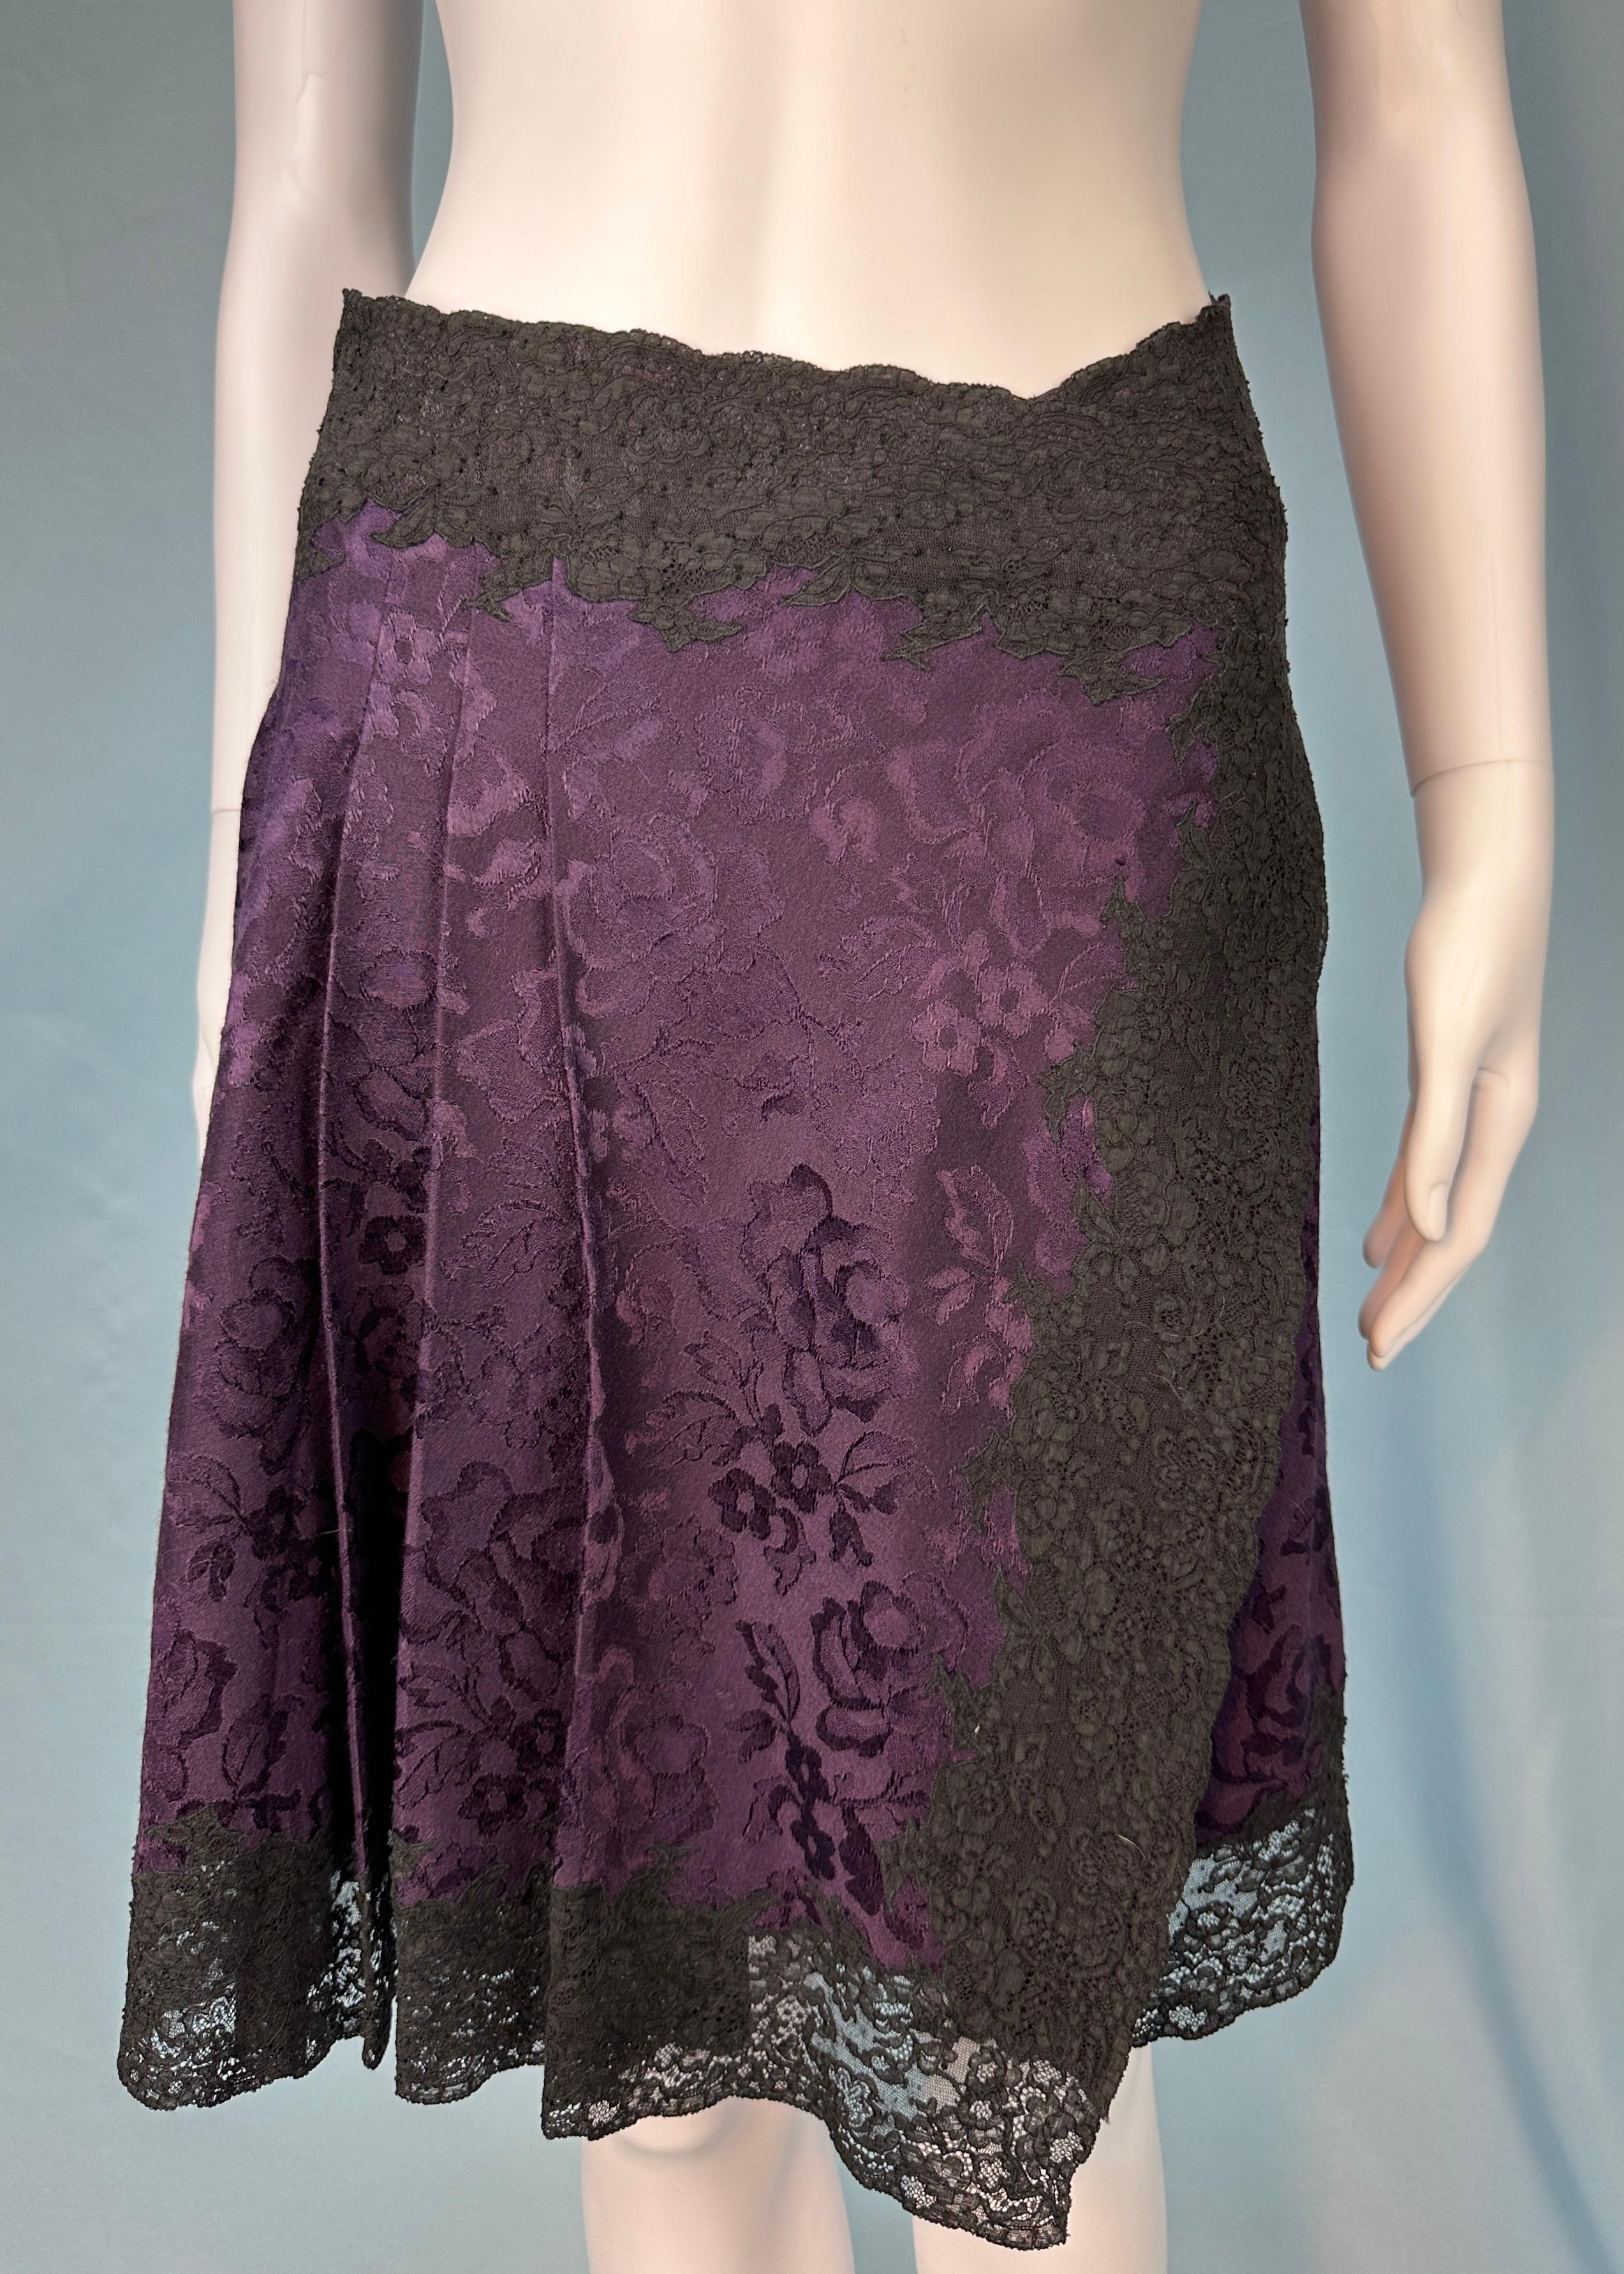 Women's Dior Fall 1998 Purple Silk Brocade and Lace Skirt & Jacket Set For Sale